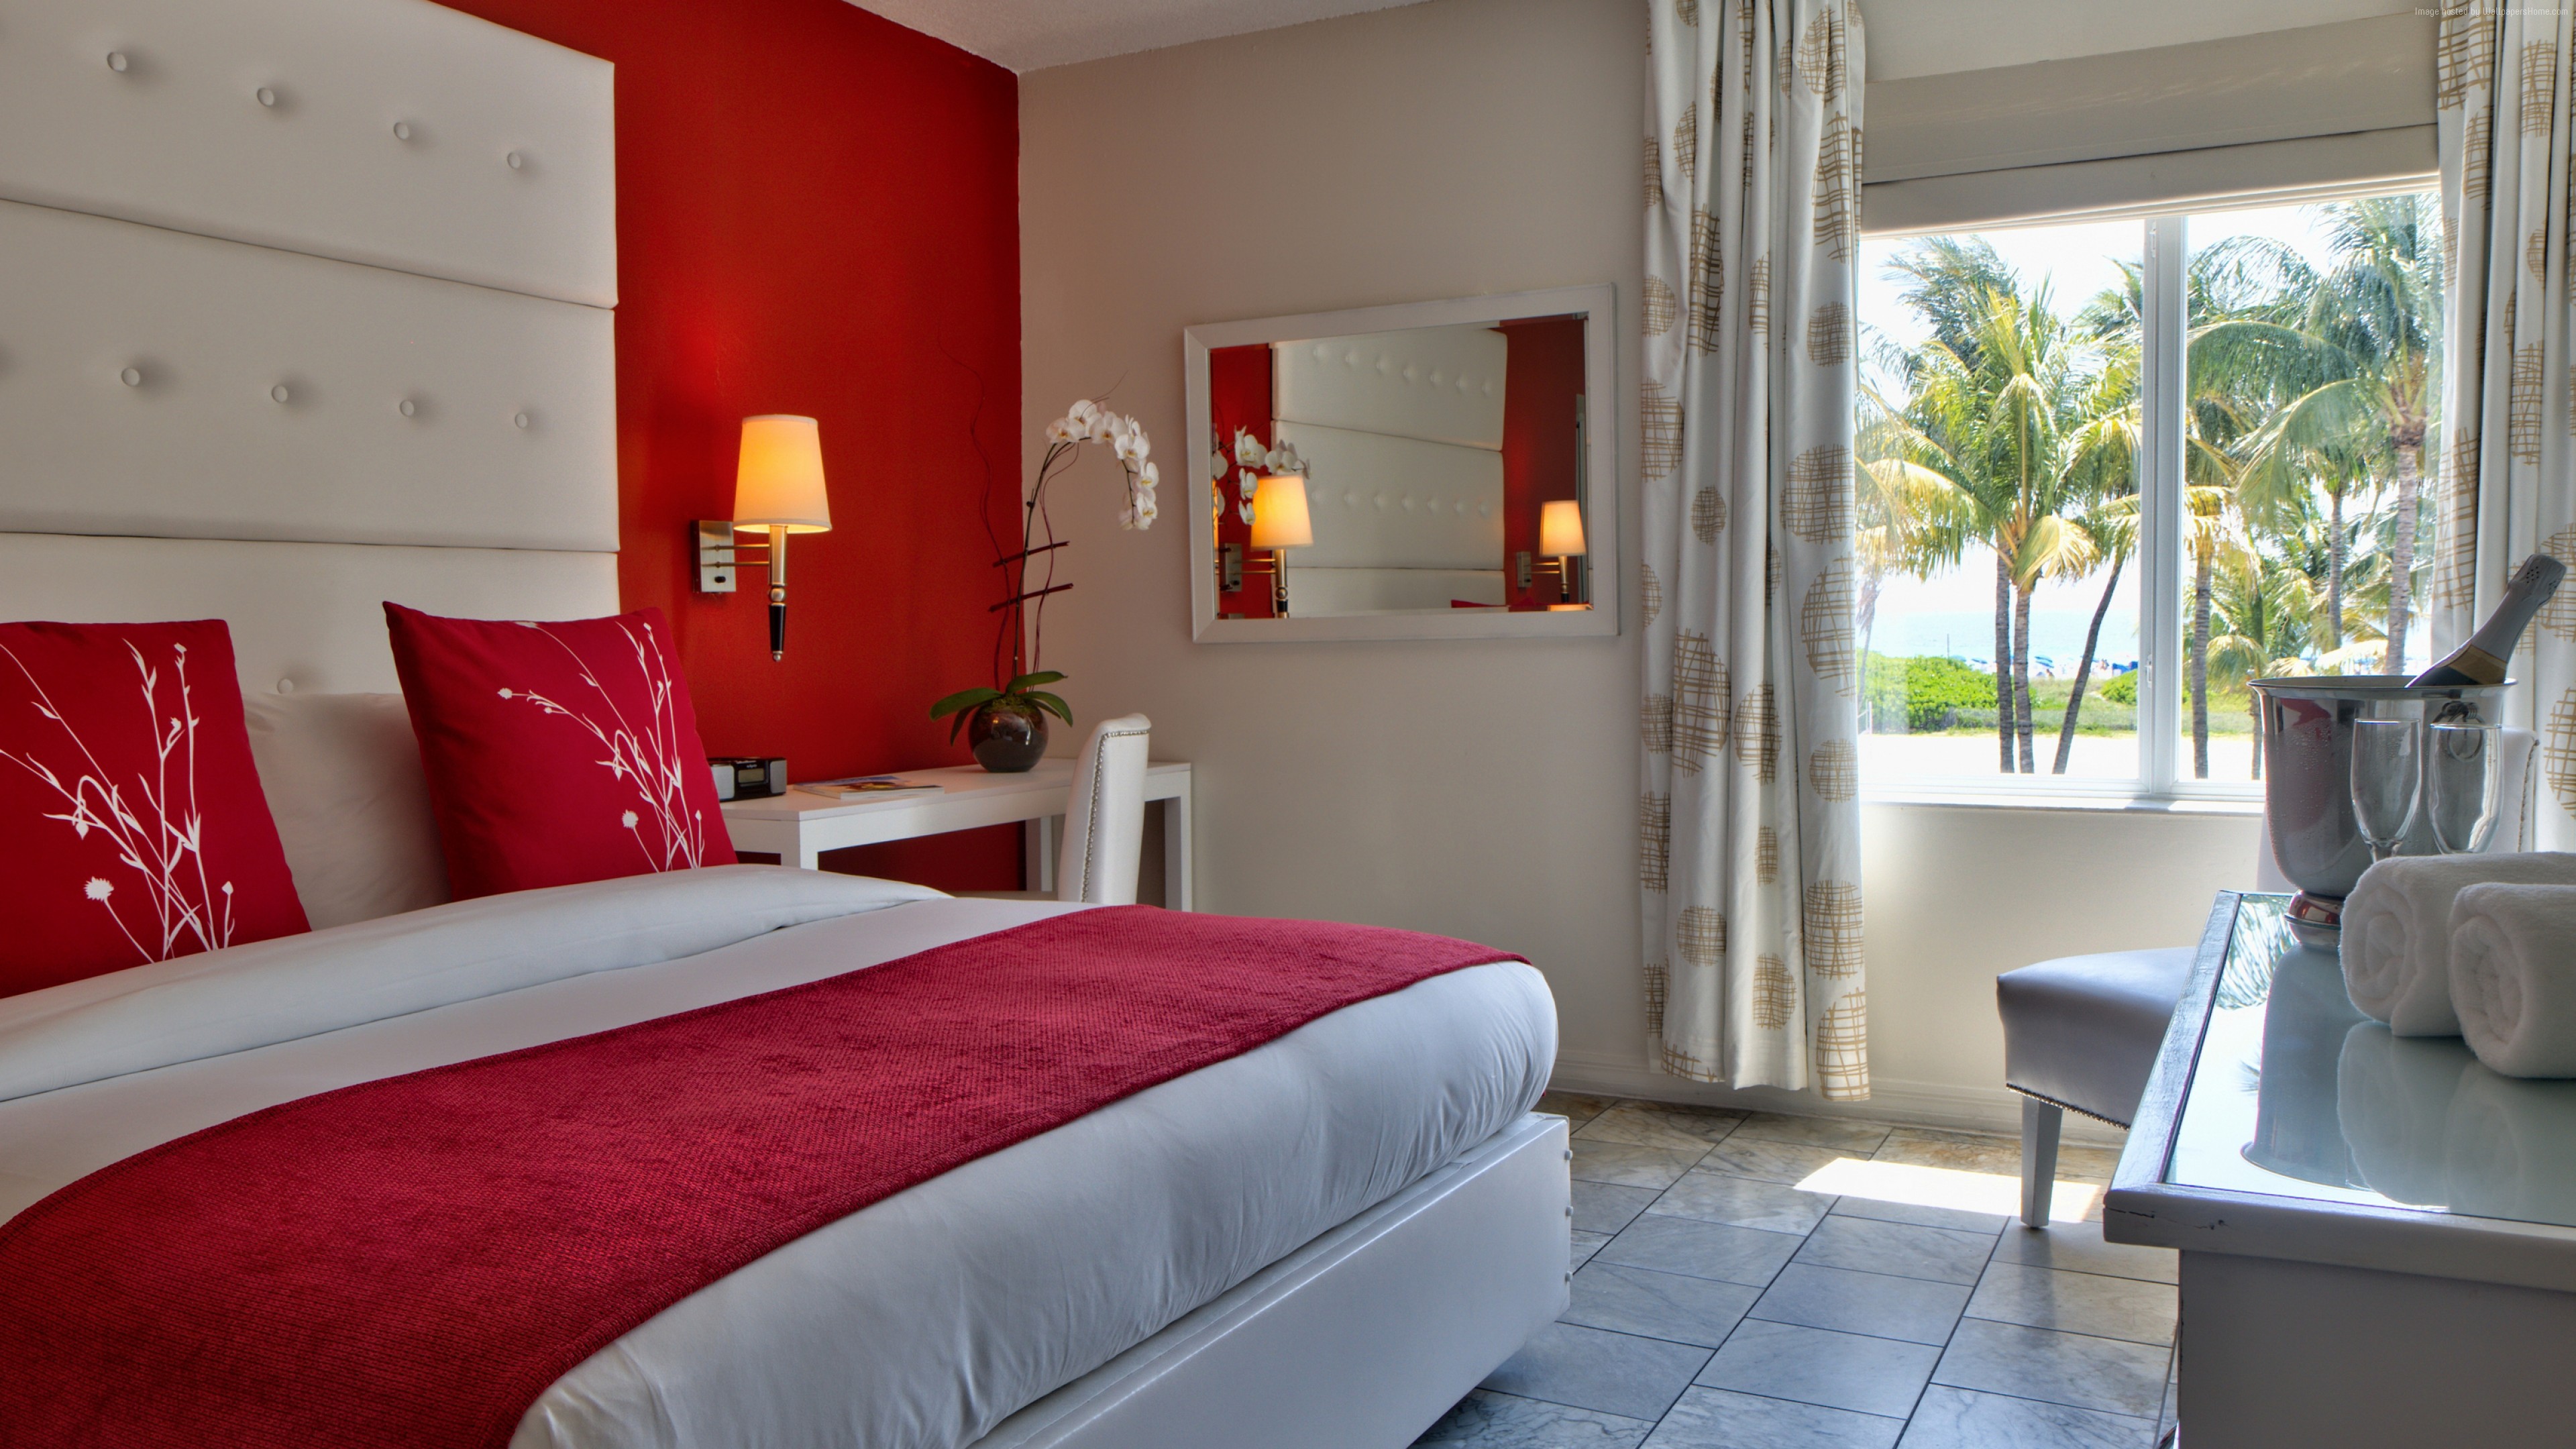 Wallpaper Red South Beach Hotel, Miami, Best Hotels of 2015, tourism, travel, resort, vacation, room, booking, Architecture